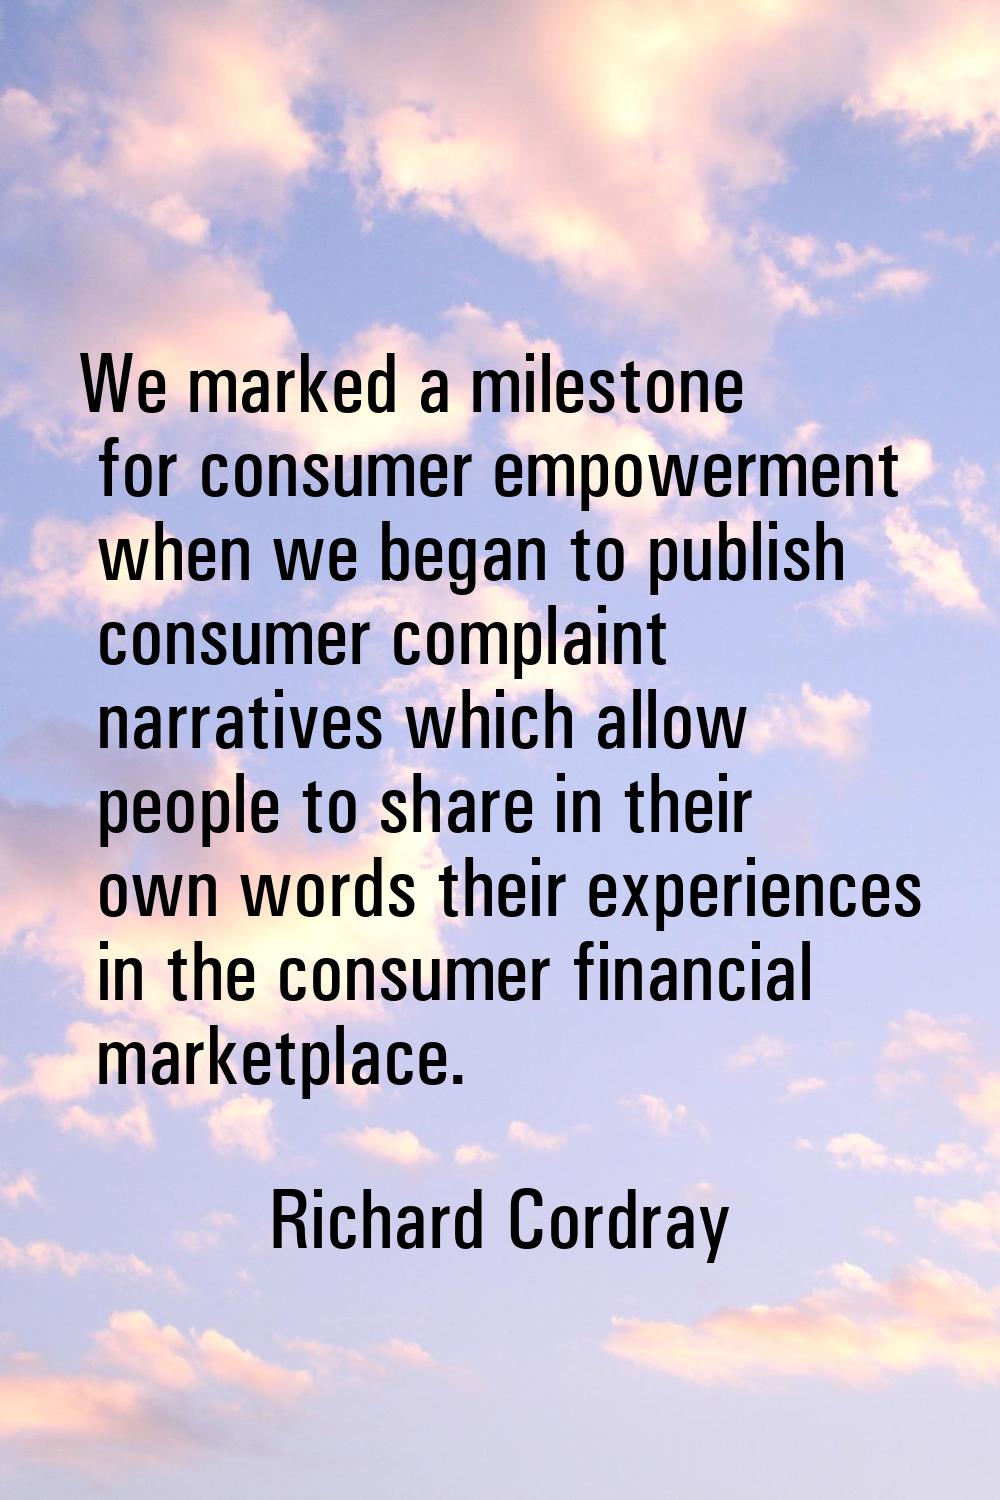 We marked a milestone for consumer empowerment when we began to publish consumer complaint narrativ